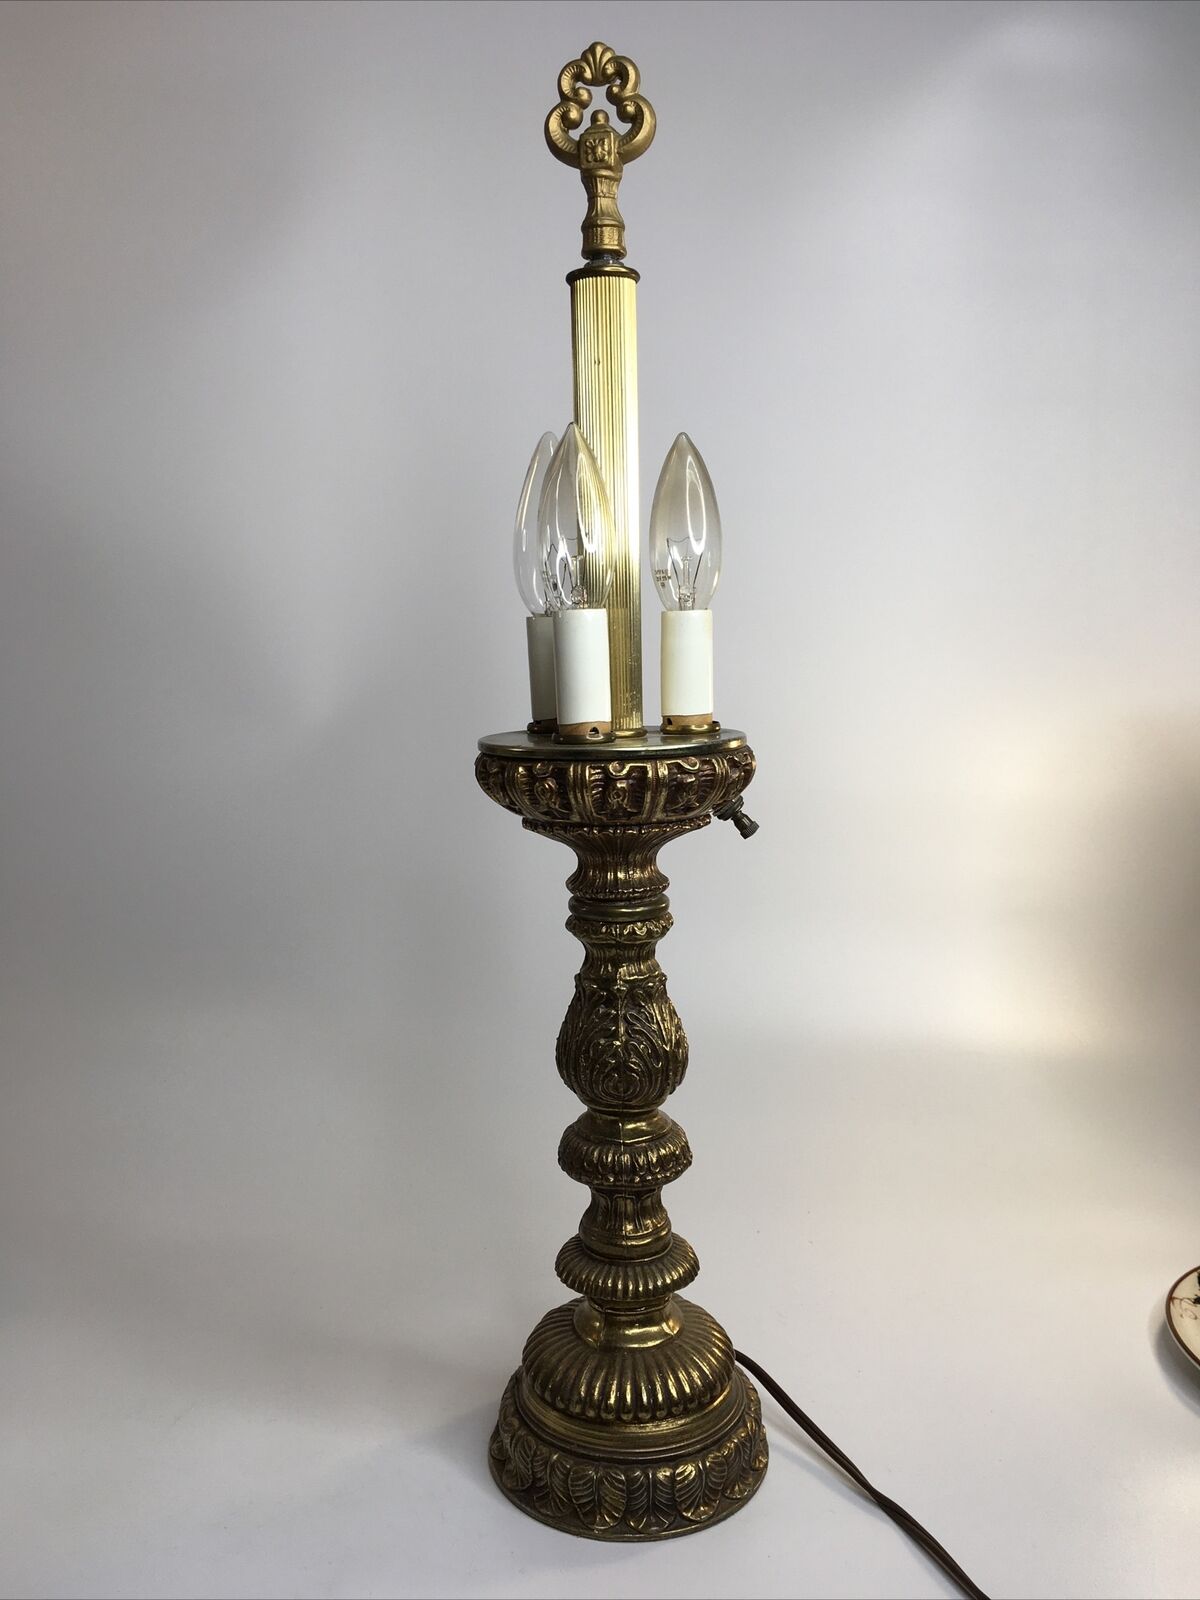 Large Vintage Bouillotte Style Lamp 3 Candle Light Brass 3 Way Switch 23in